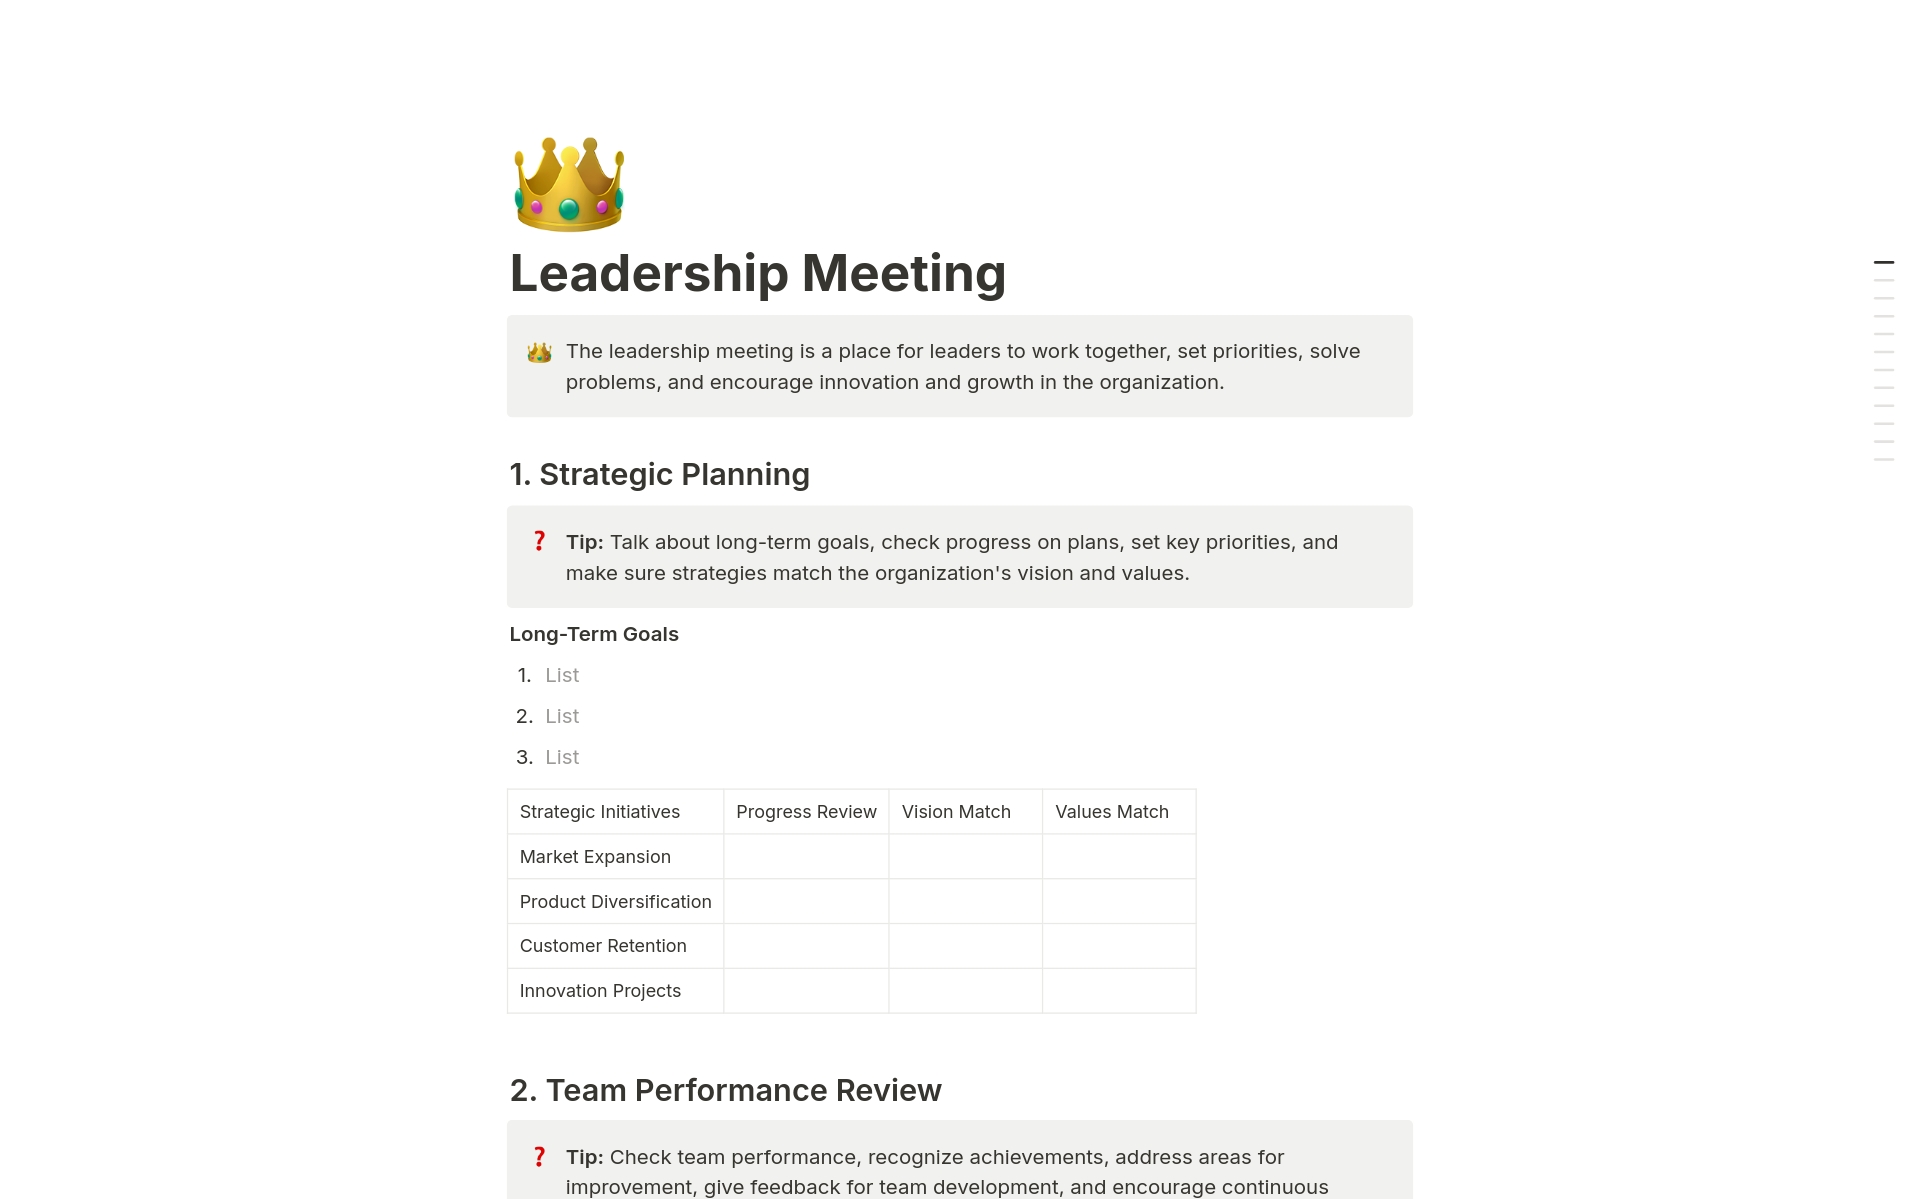 The leadership meeting is a place for leaders to work together, set priorities, solve problems, and encourage innovation and growth in the organization.